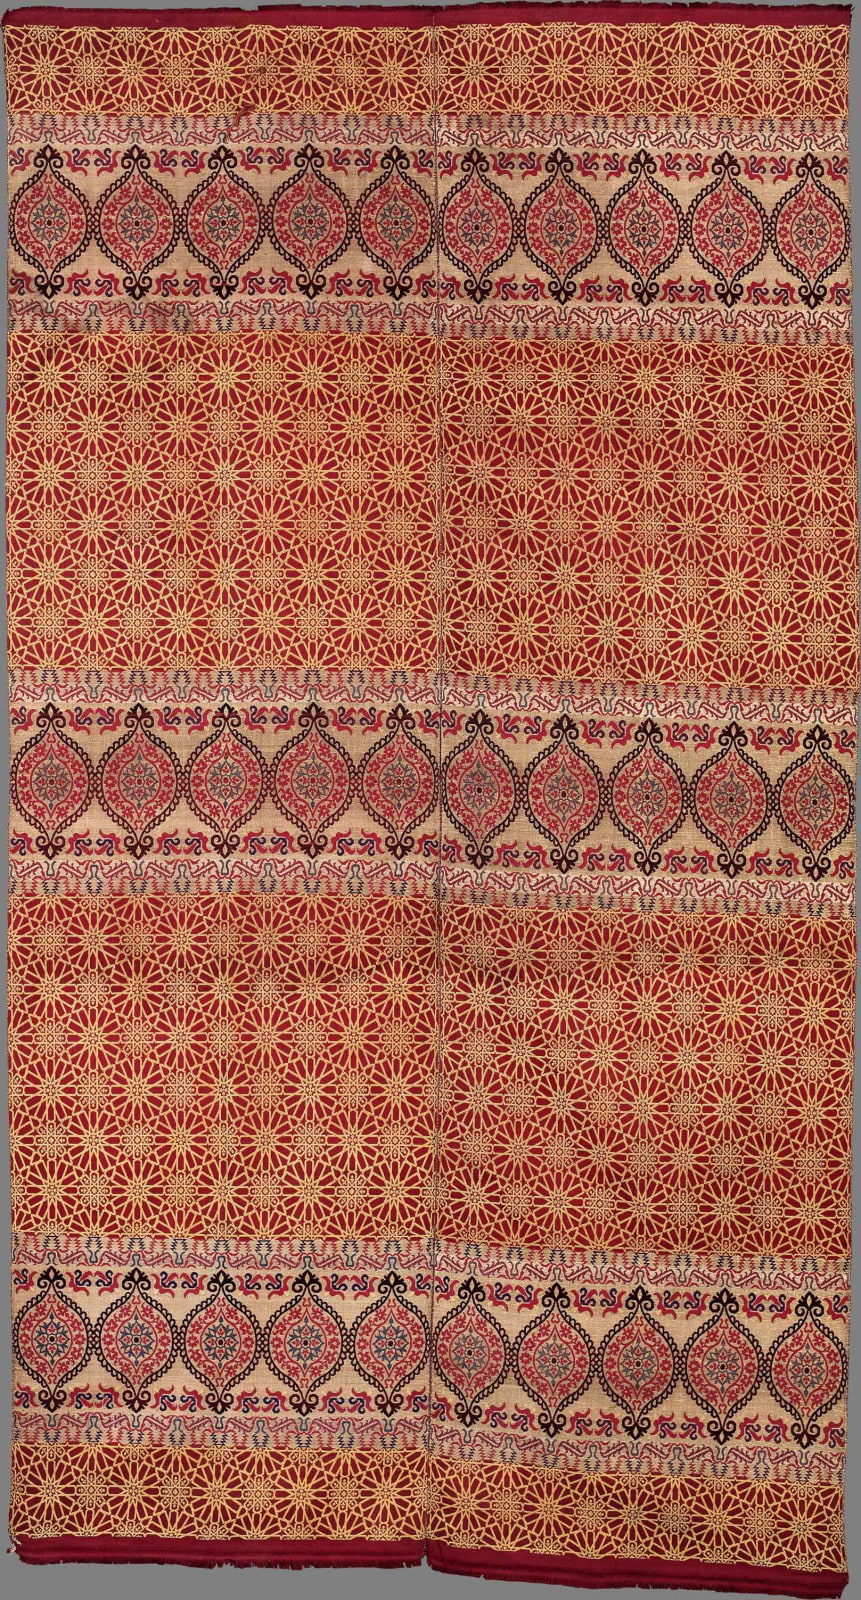 Hanging or curtain, Morocco, Fez or Tetouan, early to mid-19th century